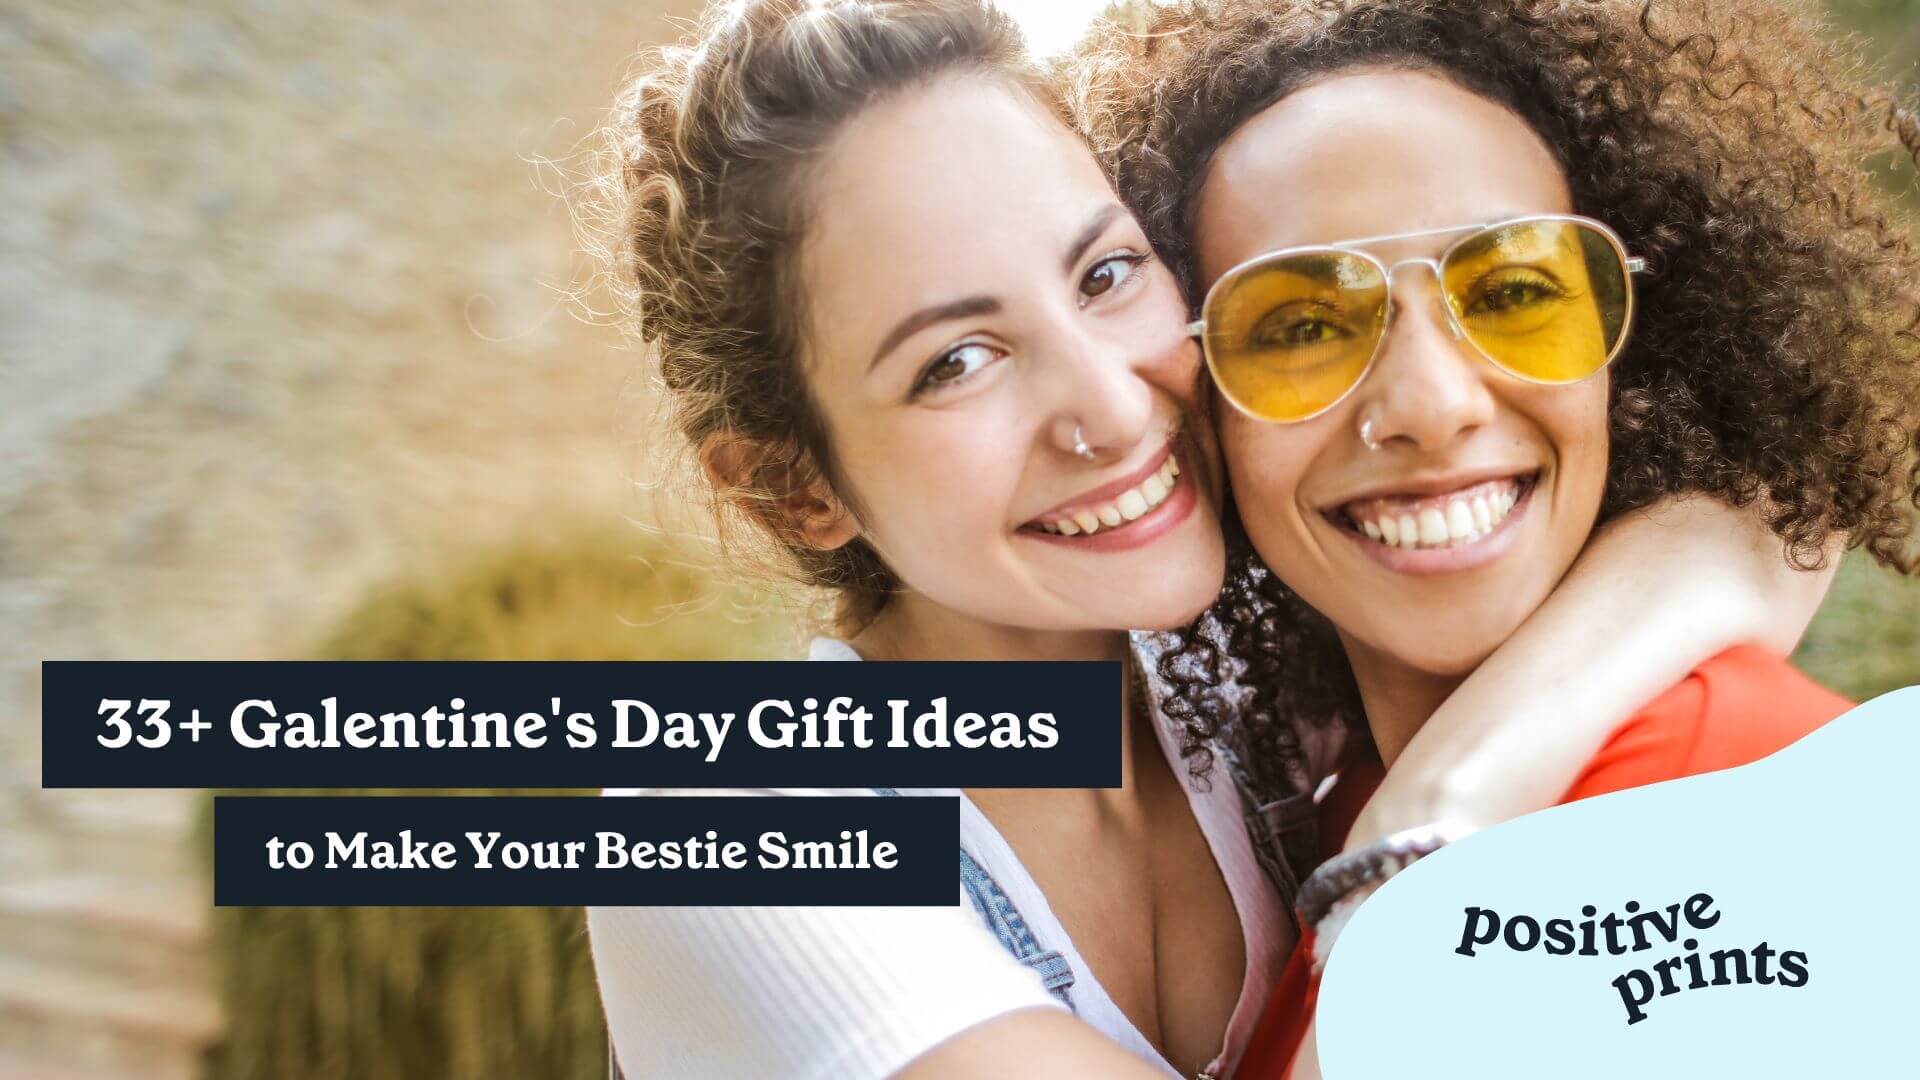 Galentine's Day Gift Ideas to Make Your Bestie Smile